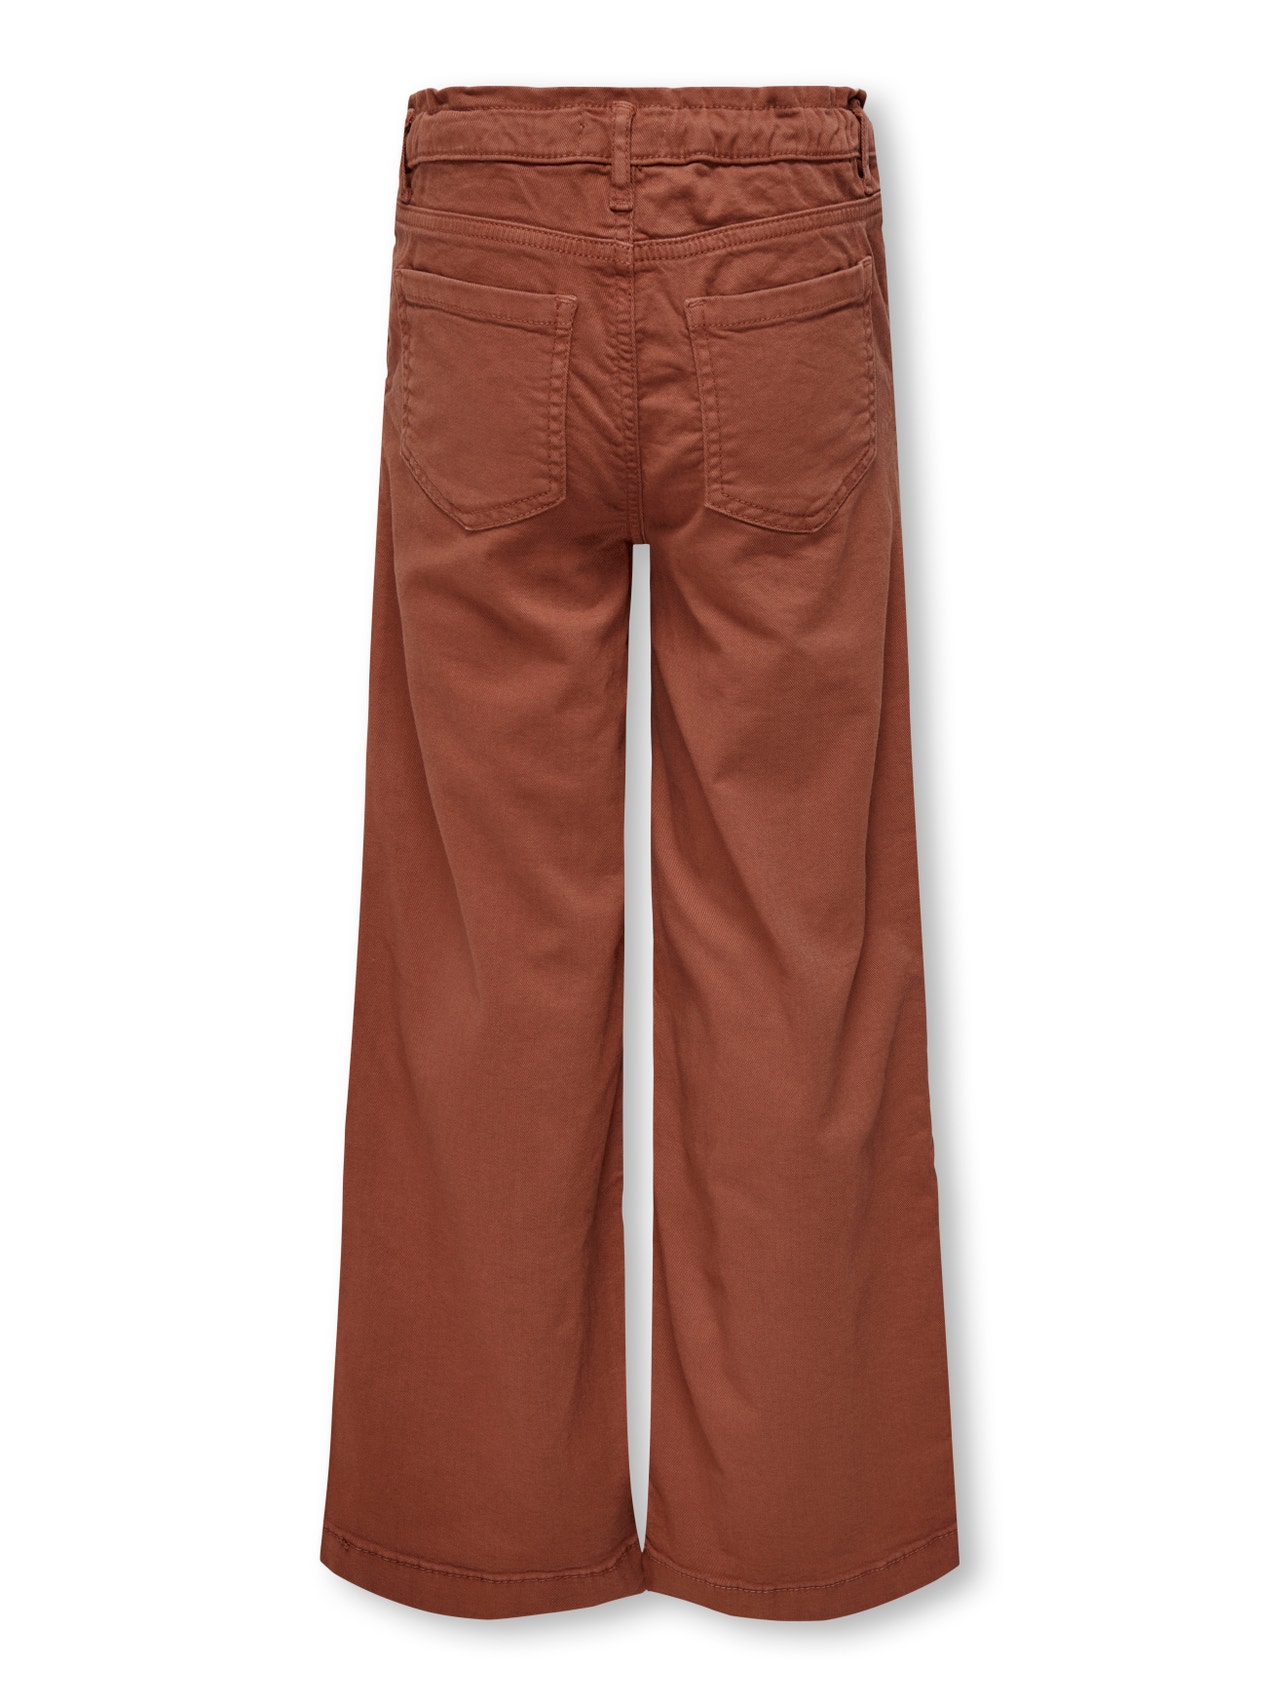 ONLY Wide Trousers -Chutney - 15288709